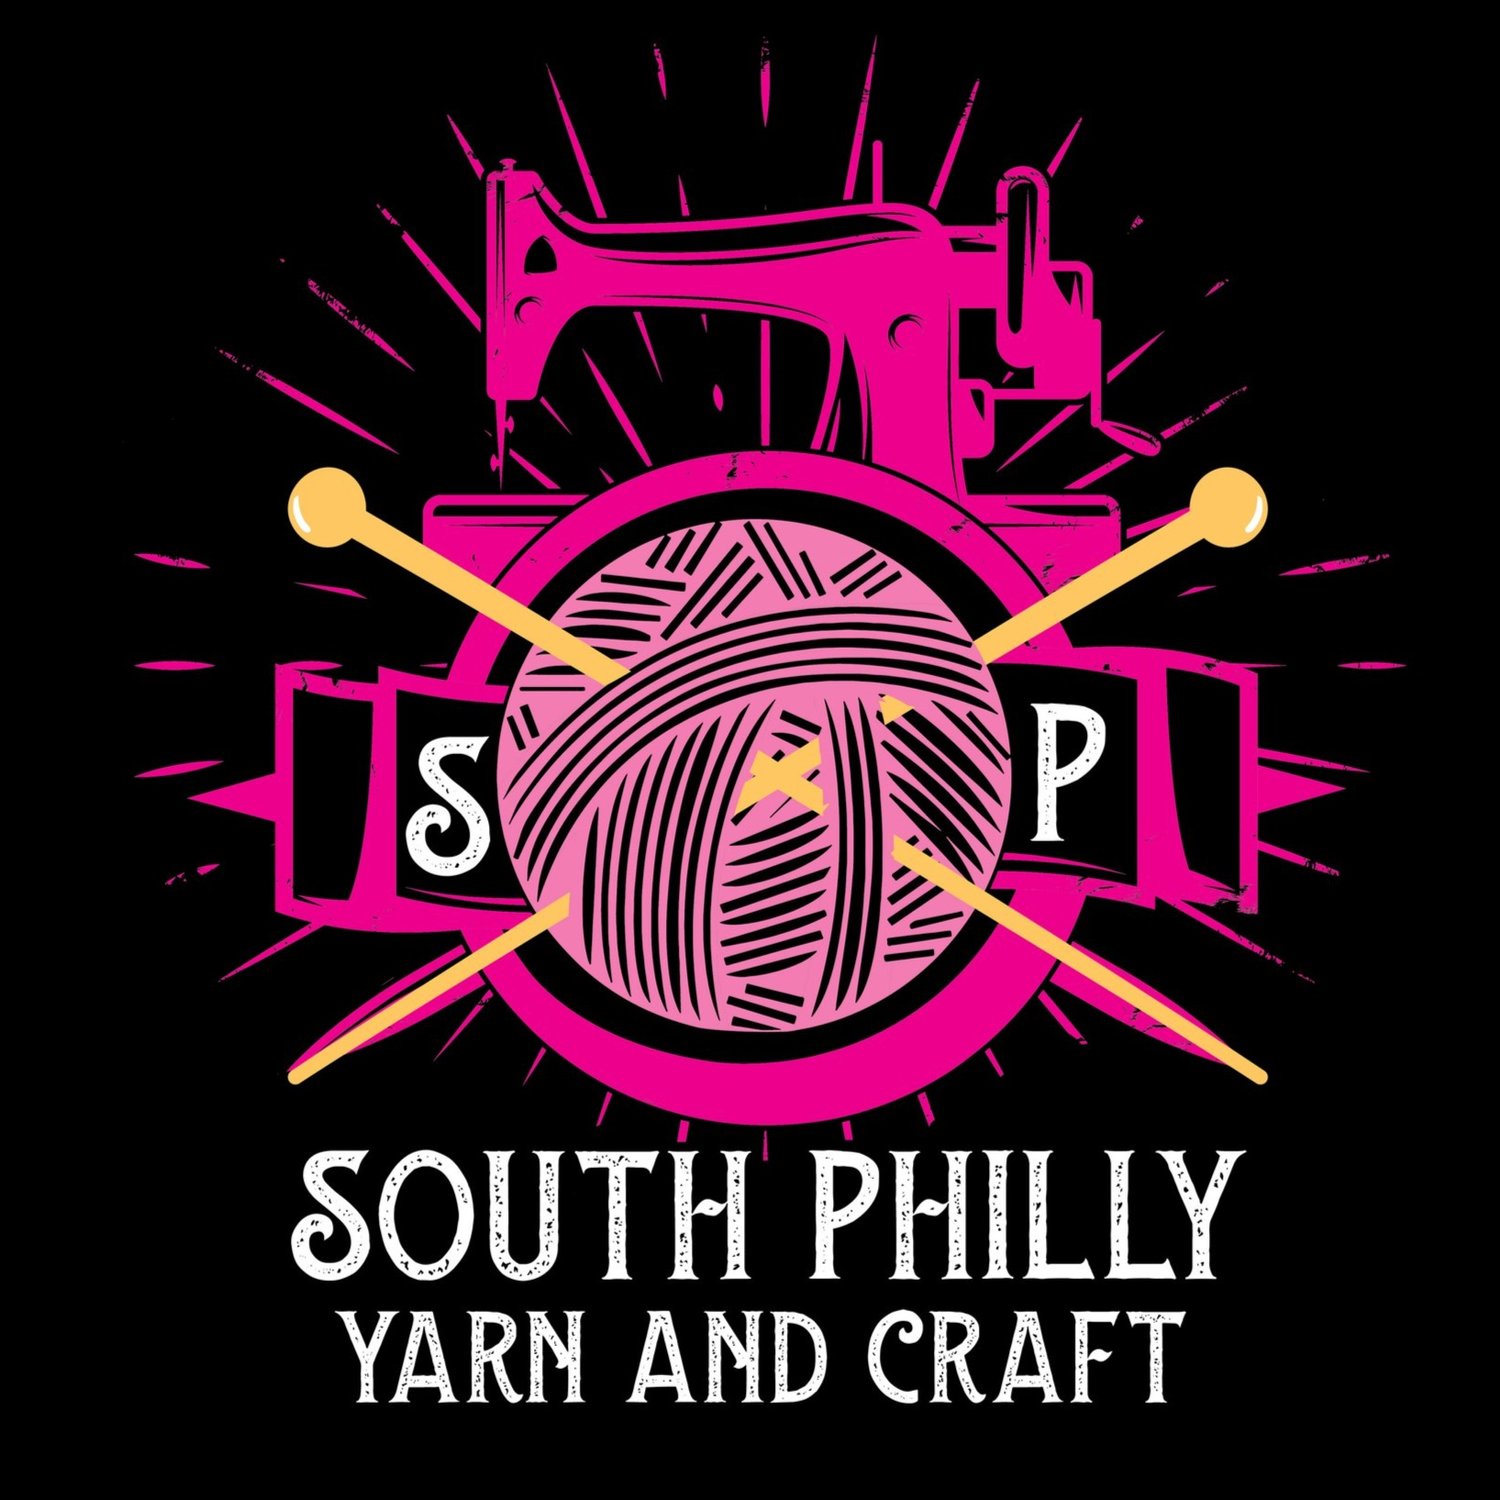 South Philly Yarn and Craft